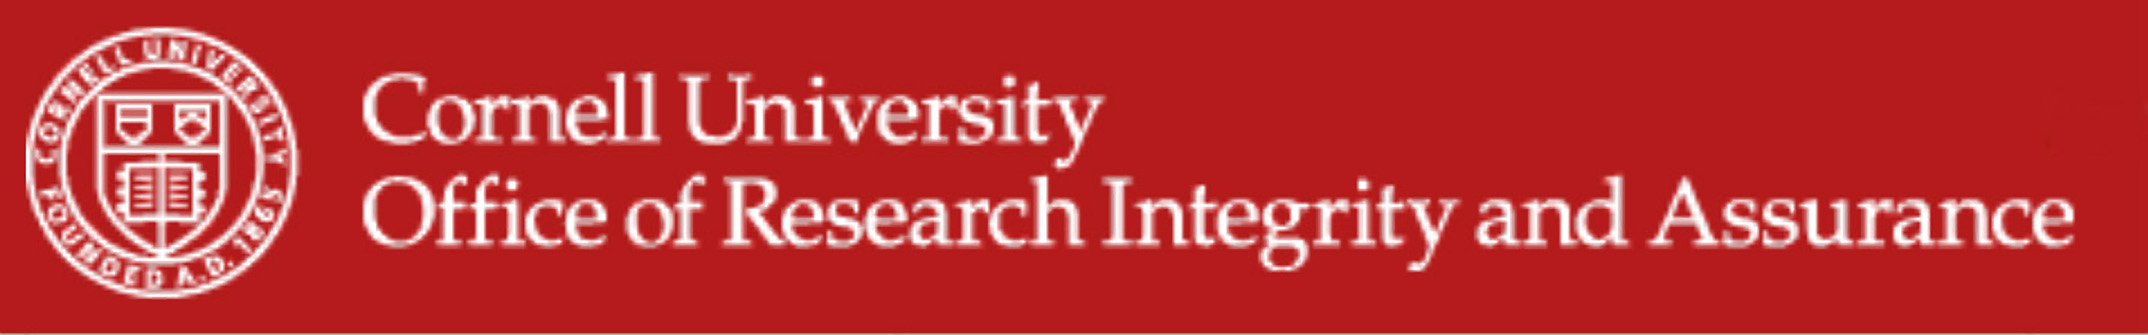 Photo shows logo of Cornell University Office of Research Integrity and Assurance, which is the university where Facebook research was conducted. 